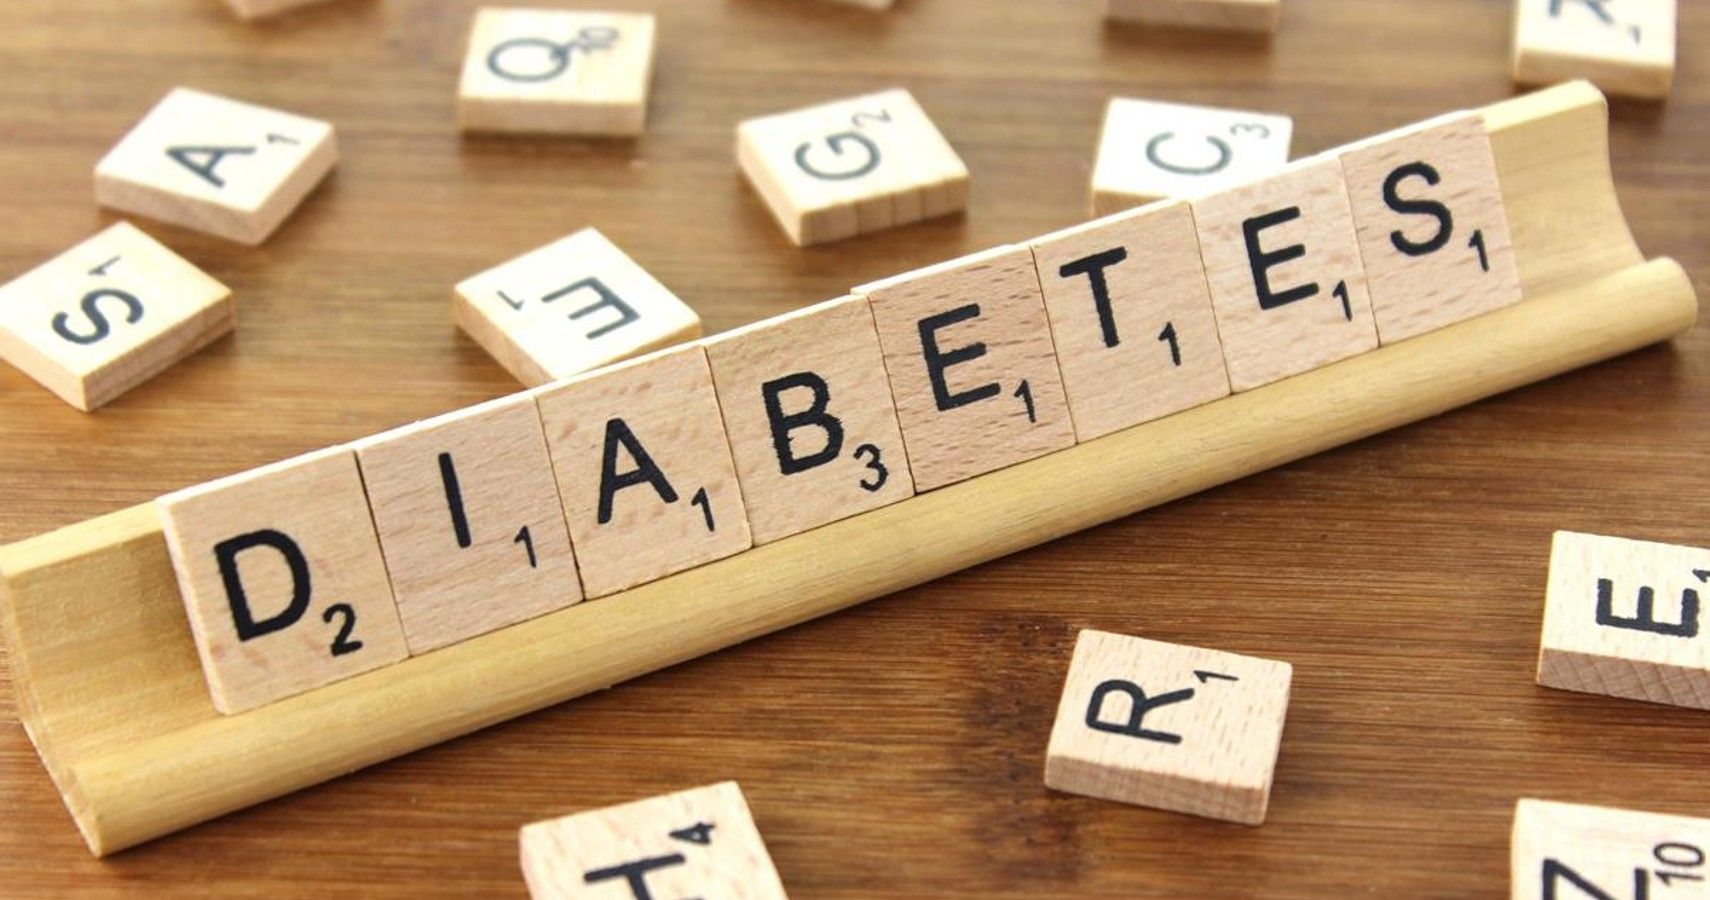 Changing Diet During Pregnancy To Promote Good Gut Bacteria May Reduce Risk Of Type 1 Diabetes (1)